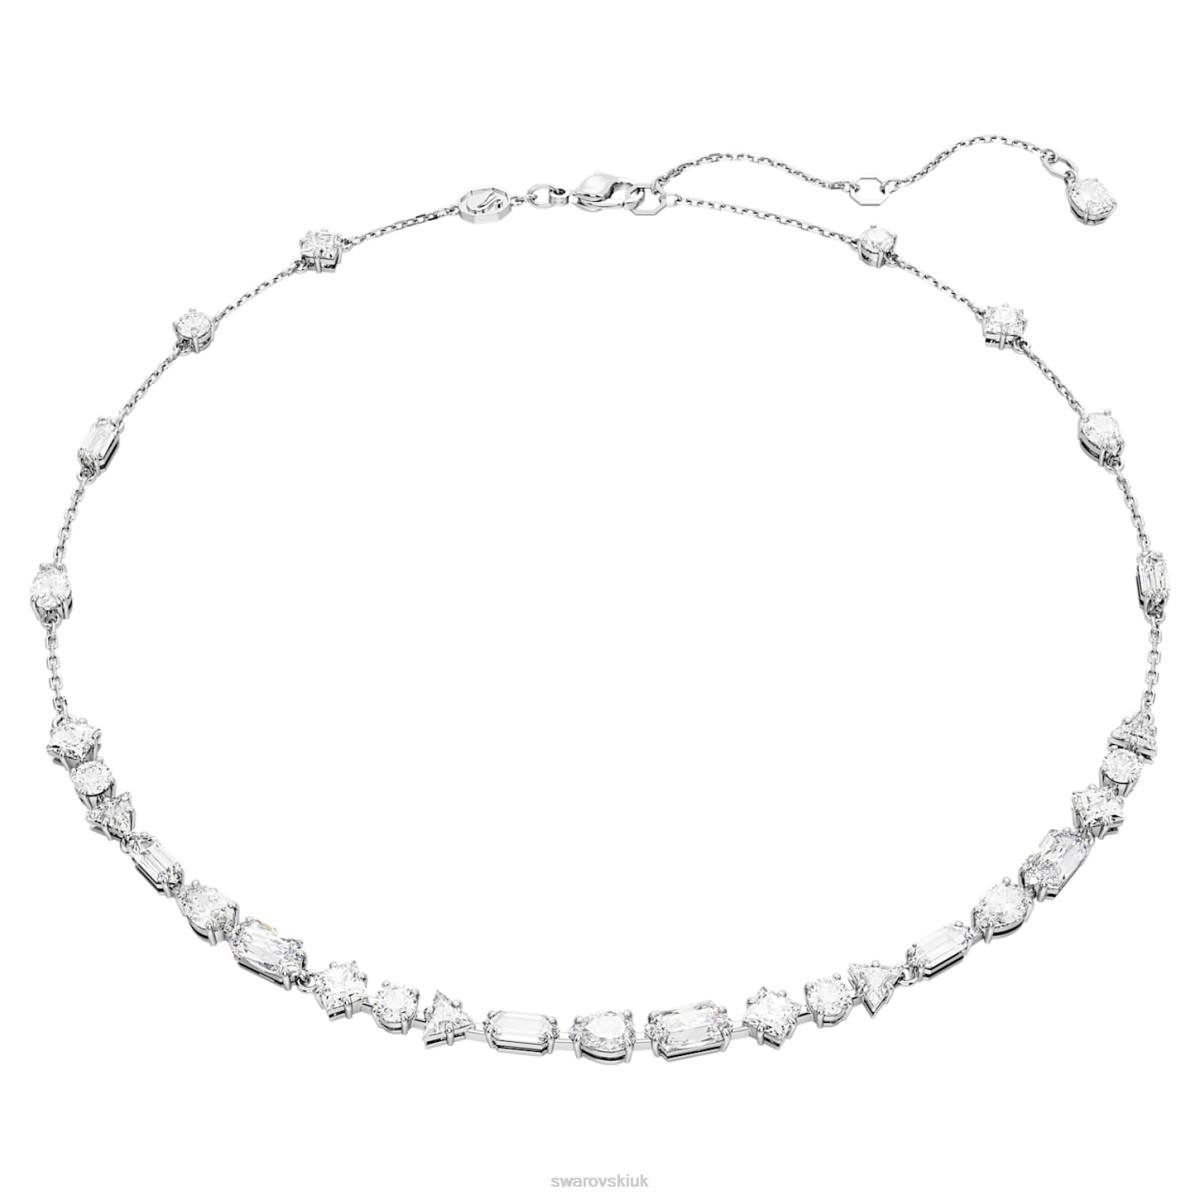 Jewelry Swarovski Mesmera necklace Mixed cuts, Scattered design, White, Rhodium plated 48JX106